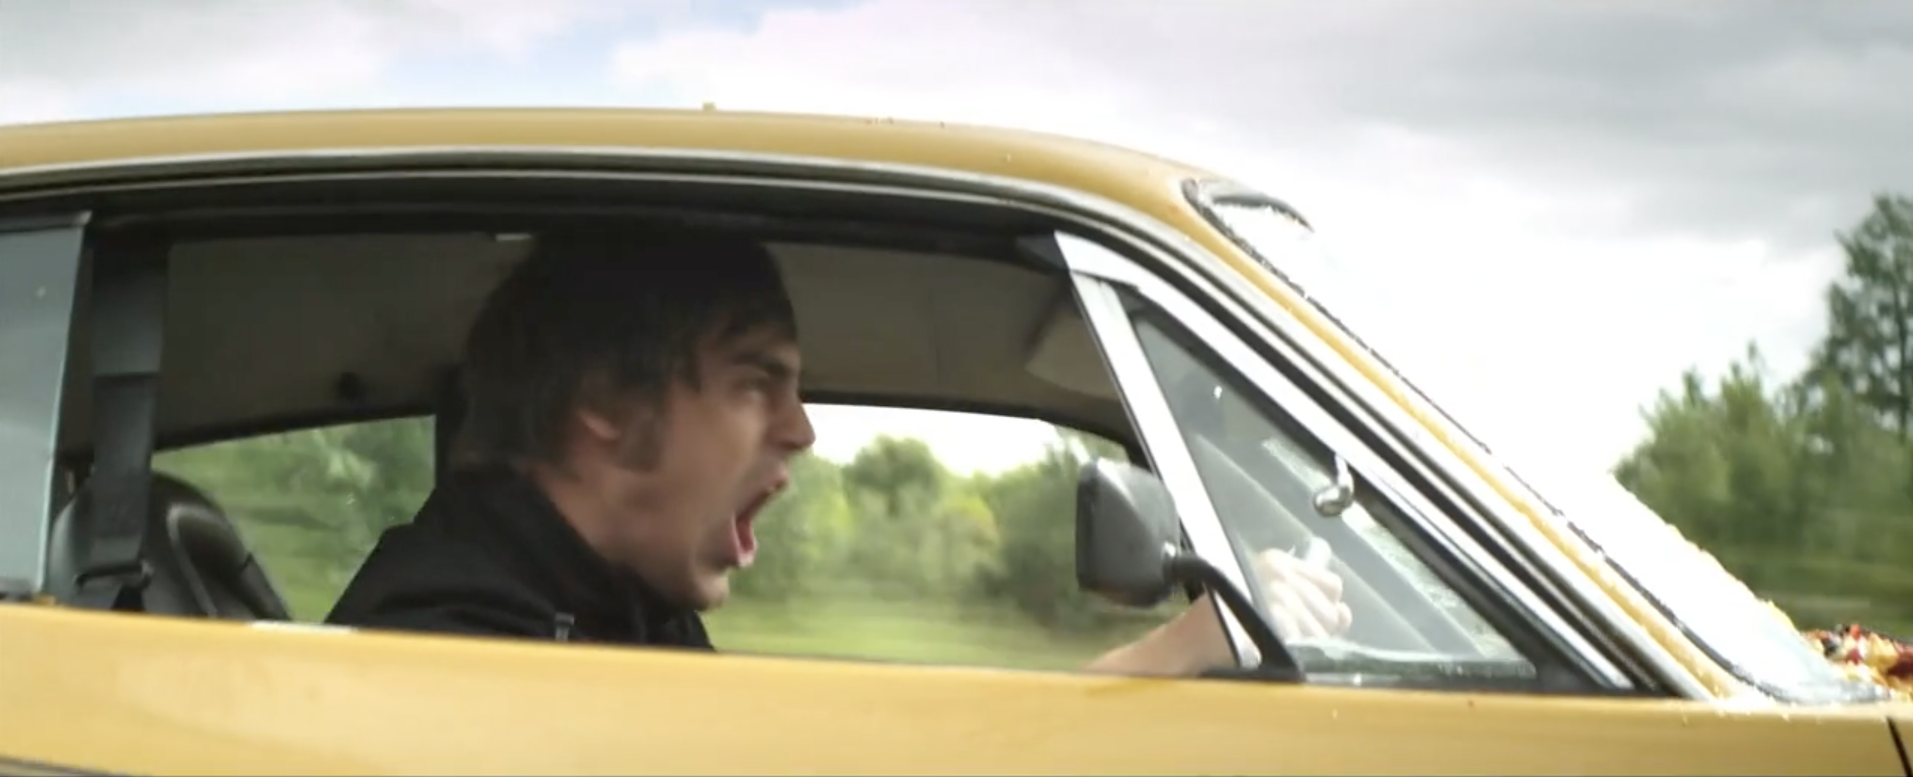 Man Driving Yellow American Muscle Car Aggressively Shouting